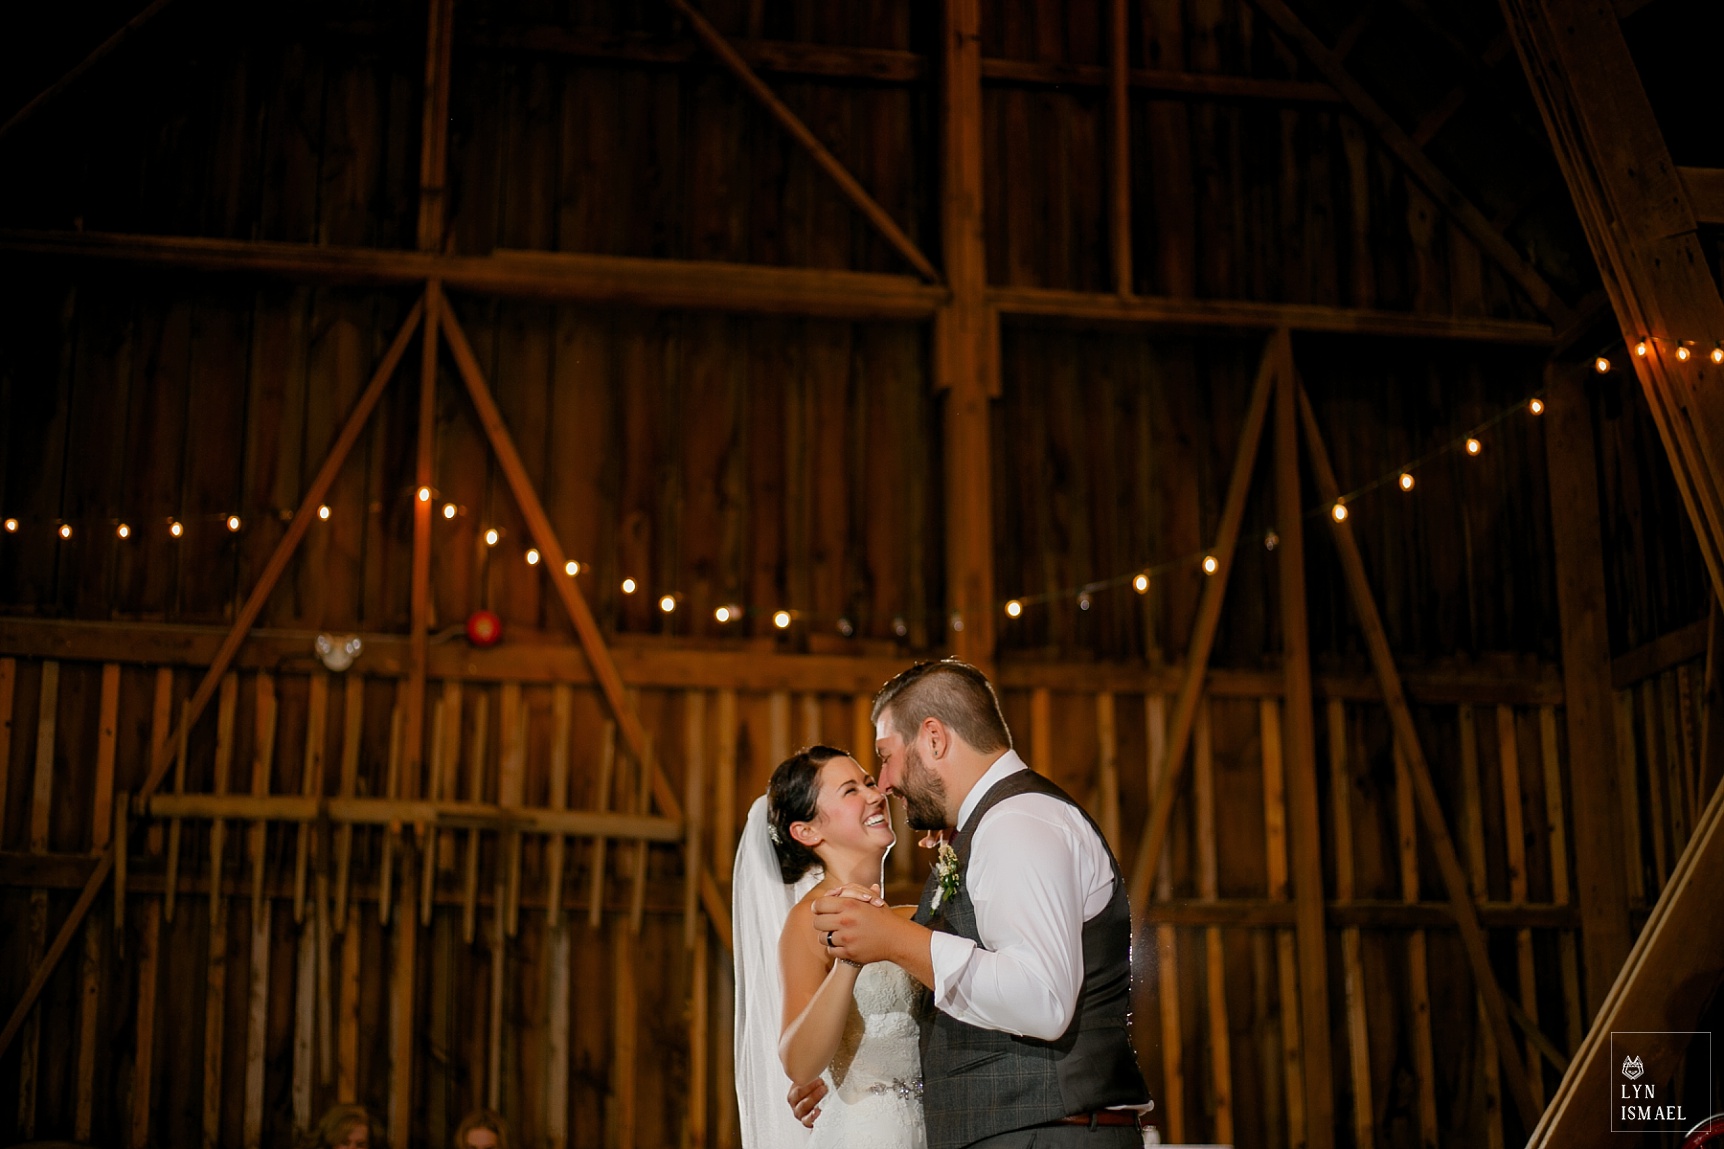 First dance at Steckle Heritage Farm